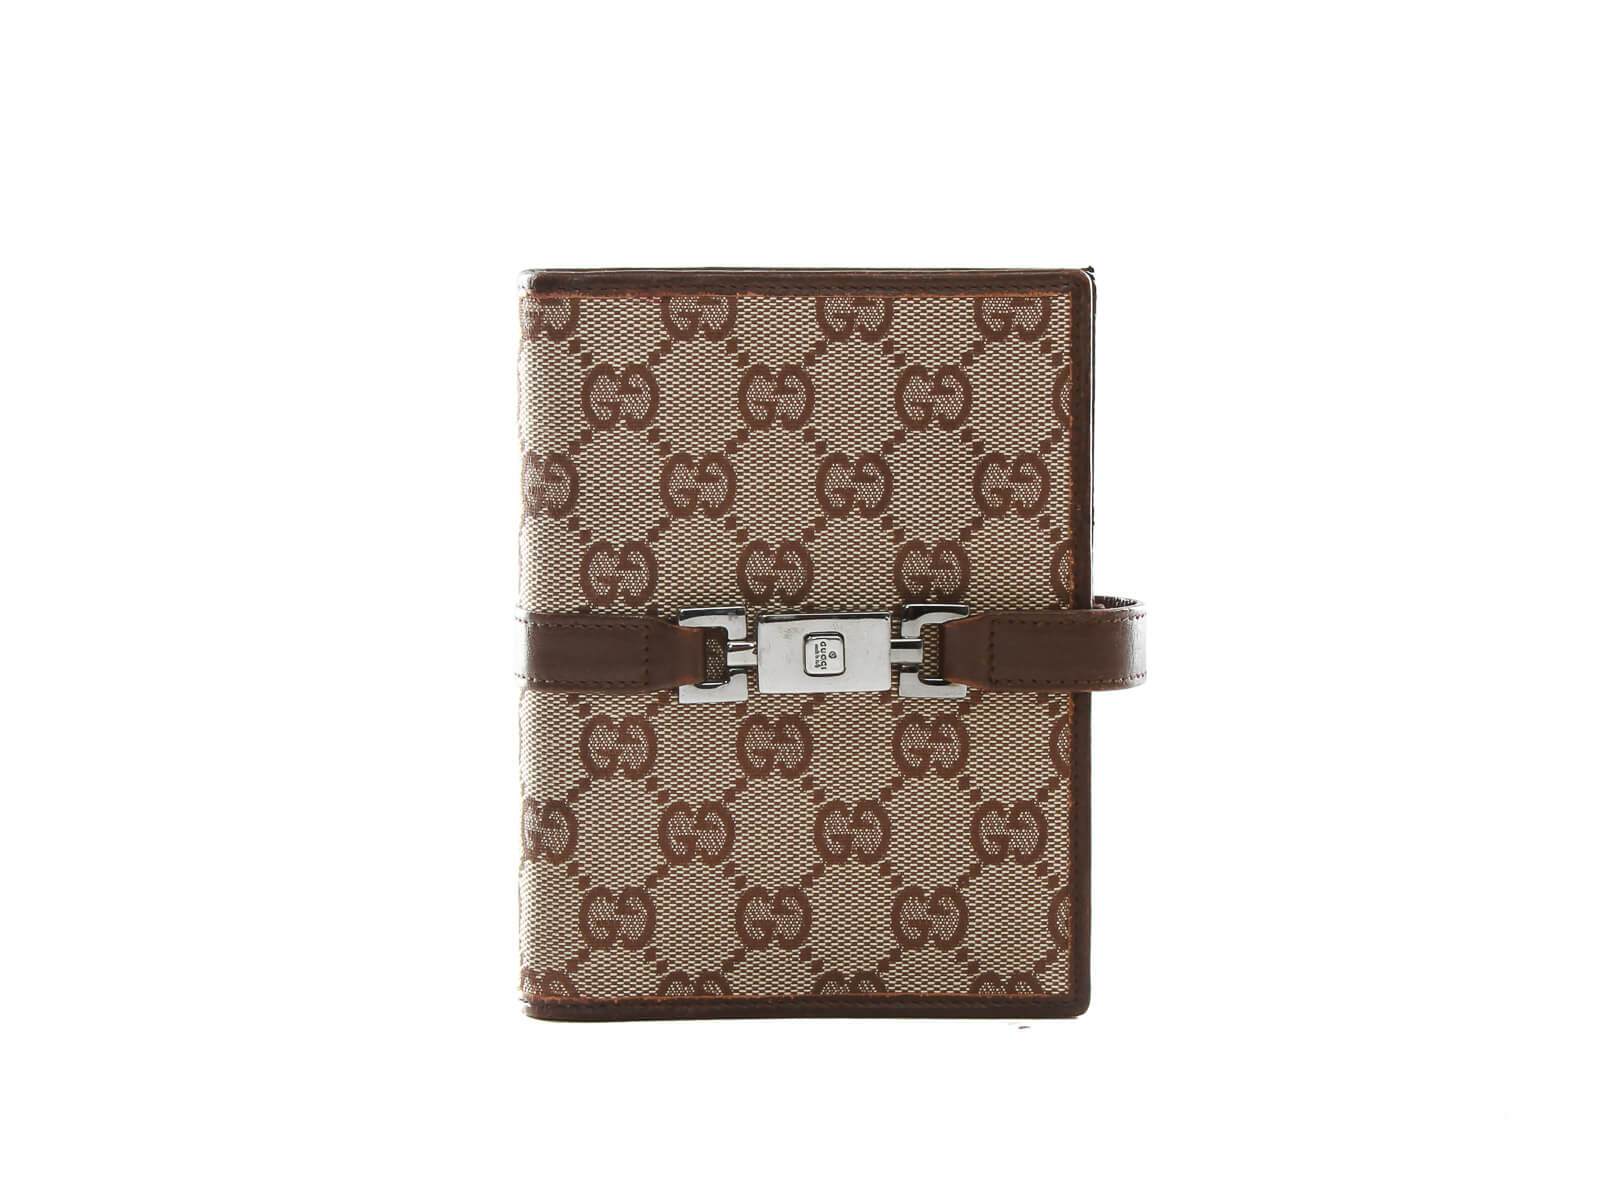 Authentic Gucci Web GG Logos Pattern Agenda Notebook Cover